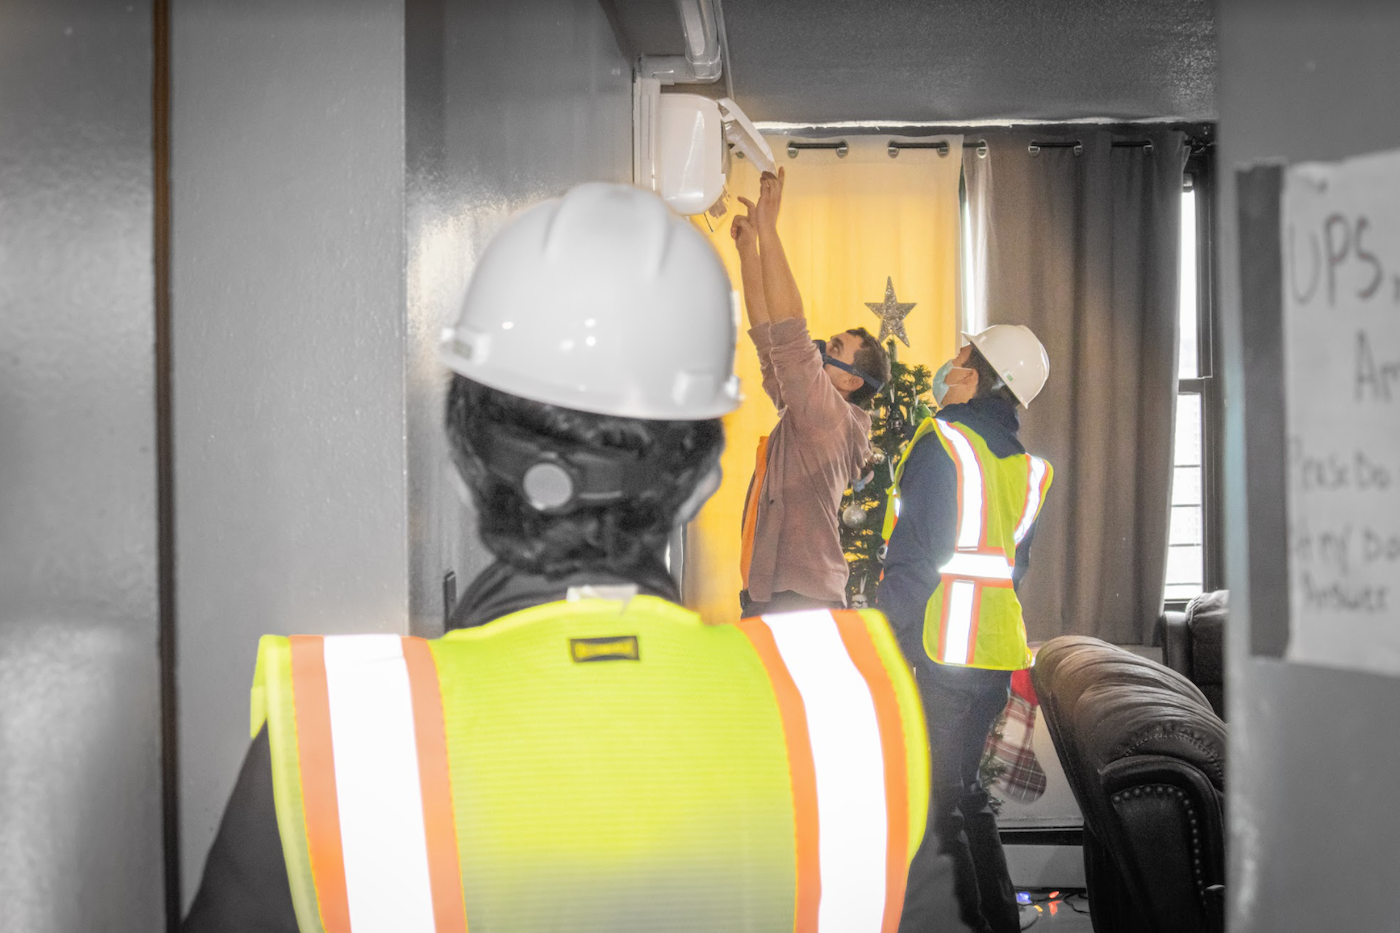 Workers in neon vests install a heat pump on the wall of an apartment